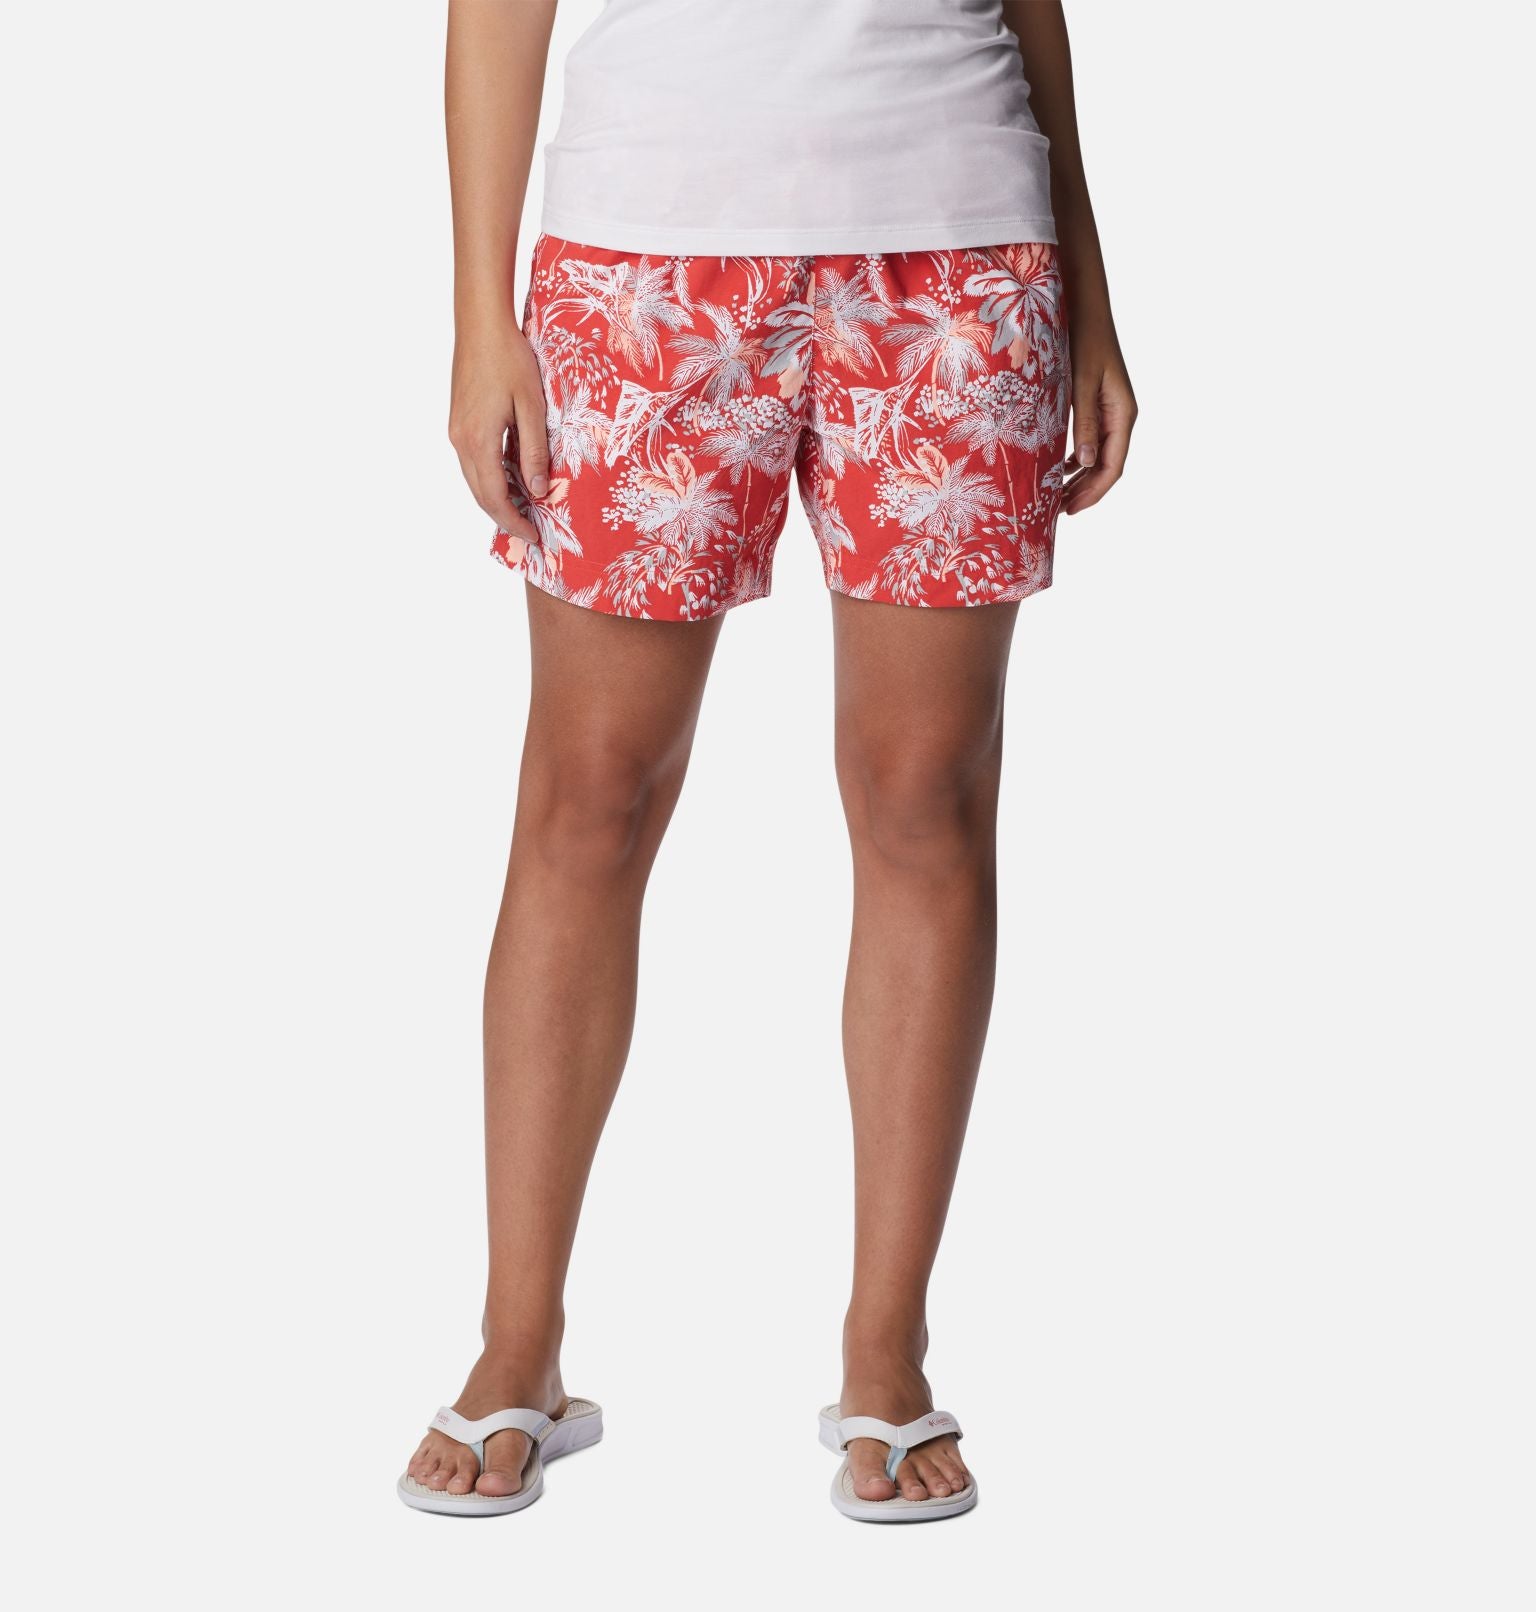 WOMEN'S 5-IN SUPER BACKCAST PRINTED SHORTS - 1881161-5